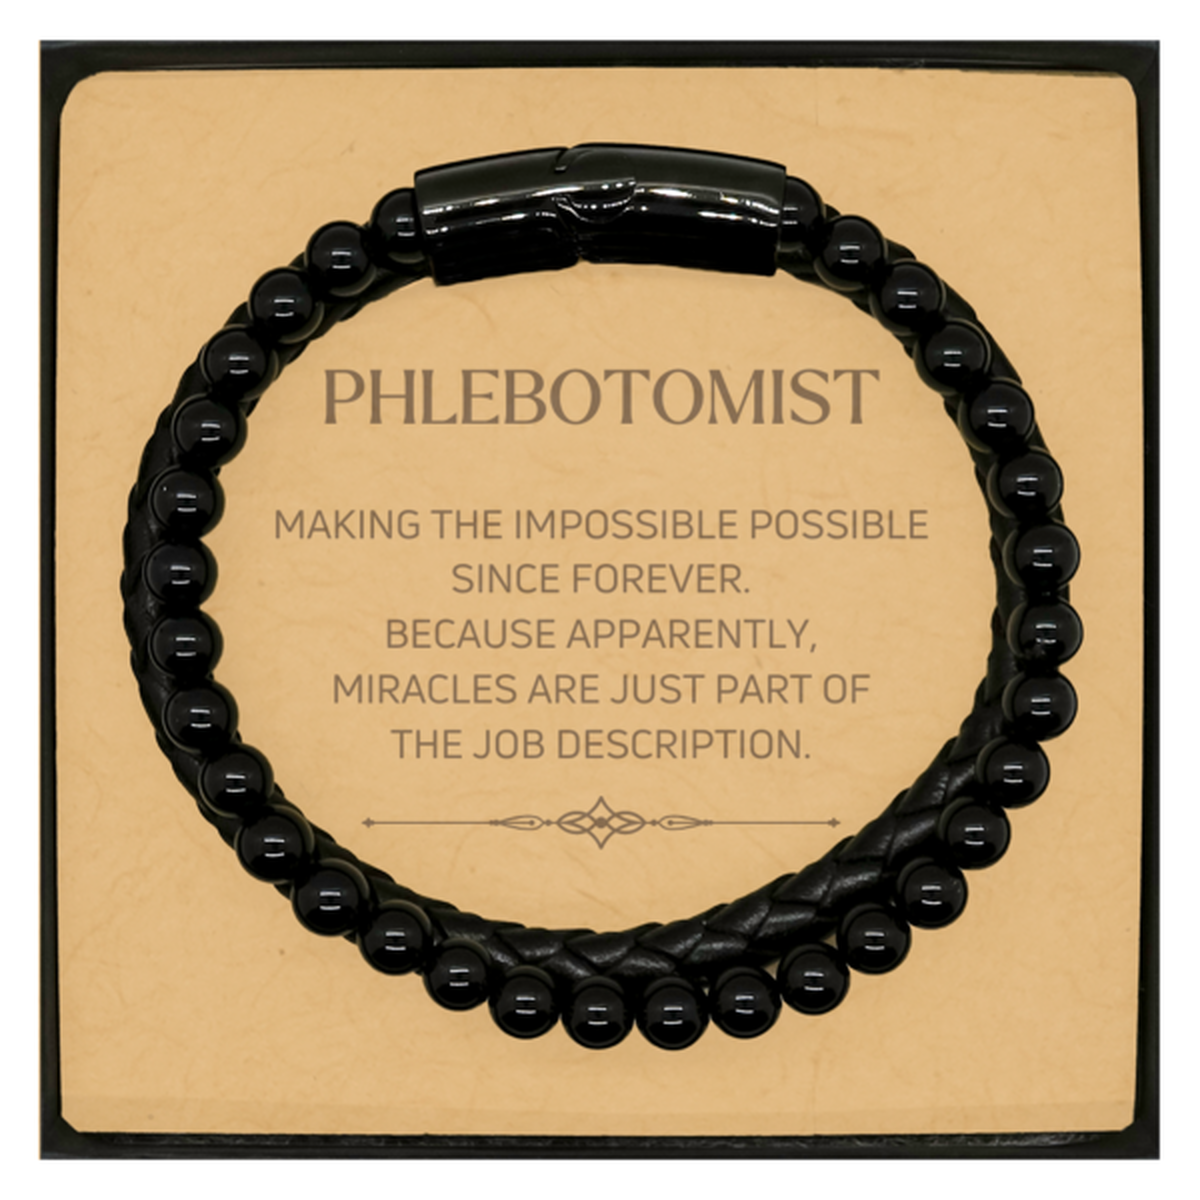 Funny Phlebotomist Gifts, Miracles are just part of the job description, Inspirational Birthday Christmas Stone Leather Bracelets For Phlebotomist, Men, Women, Coworkers, Friends, Boss